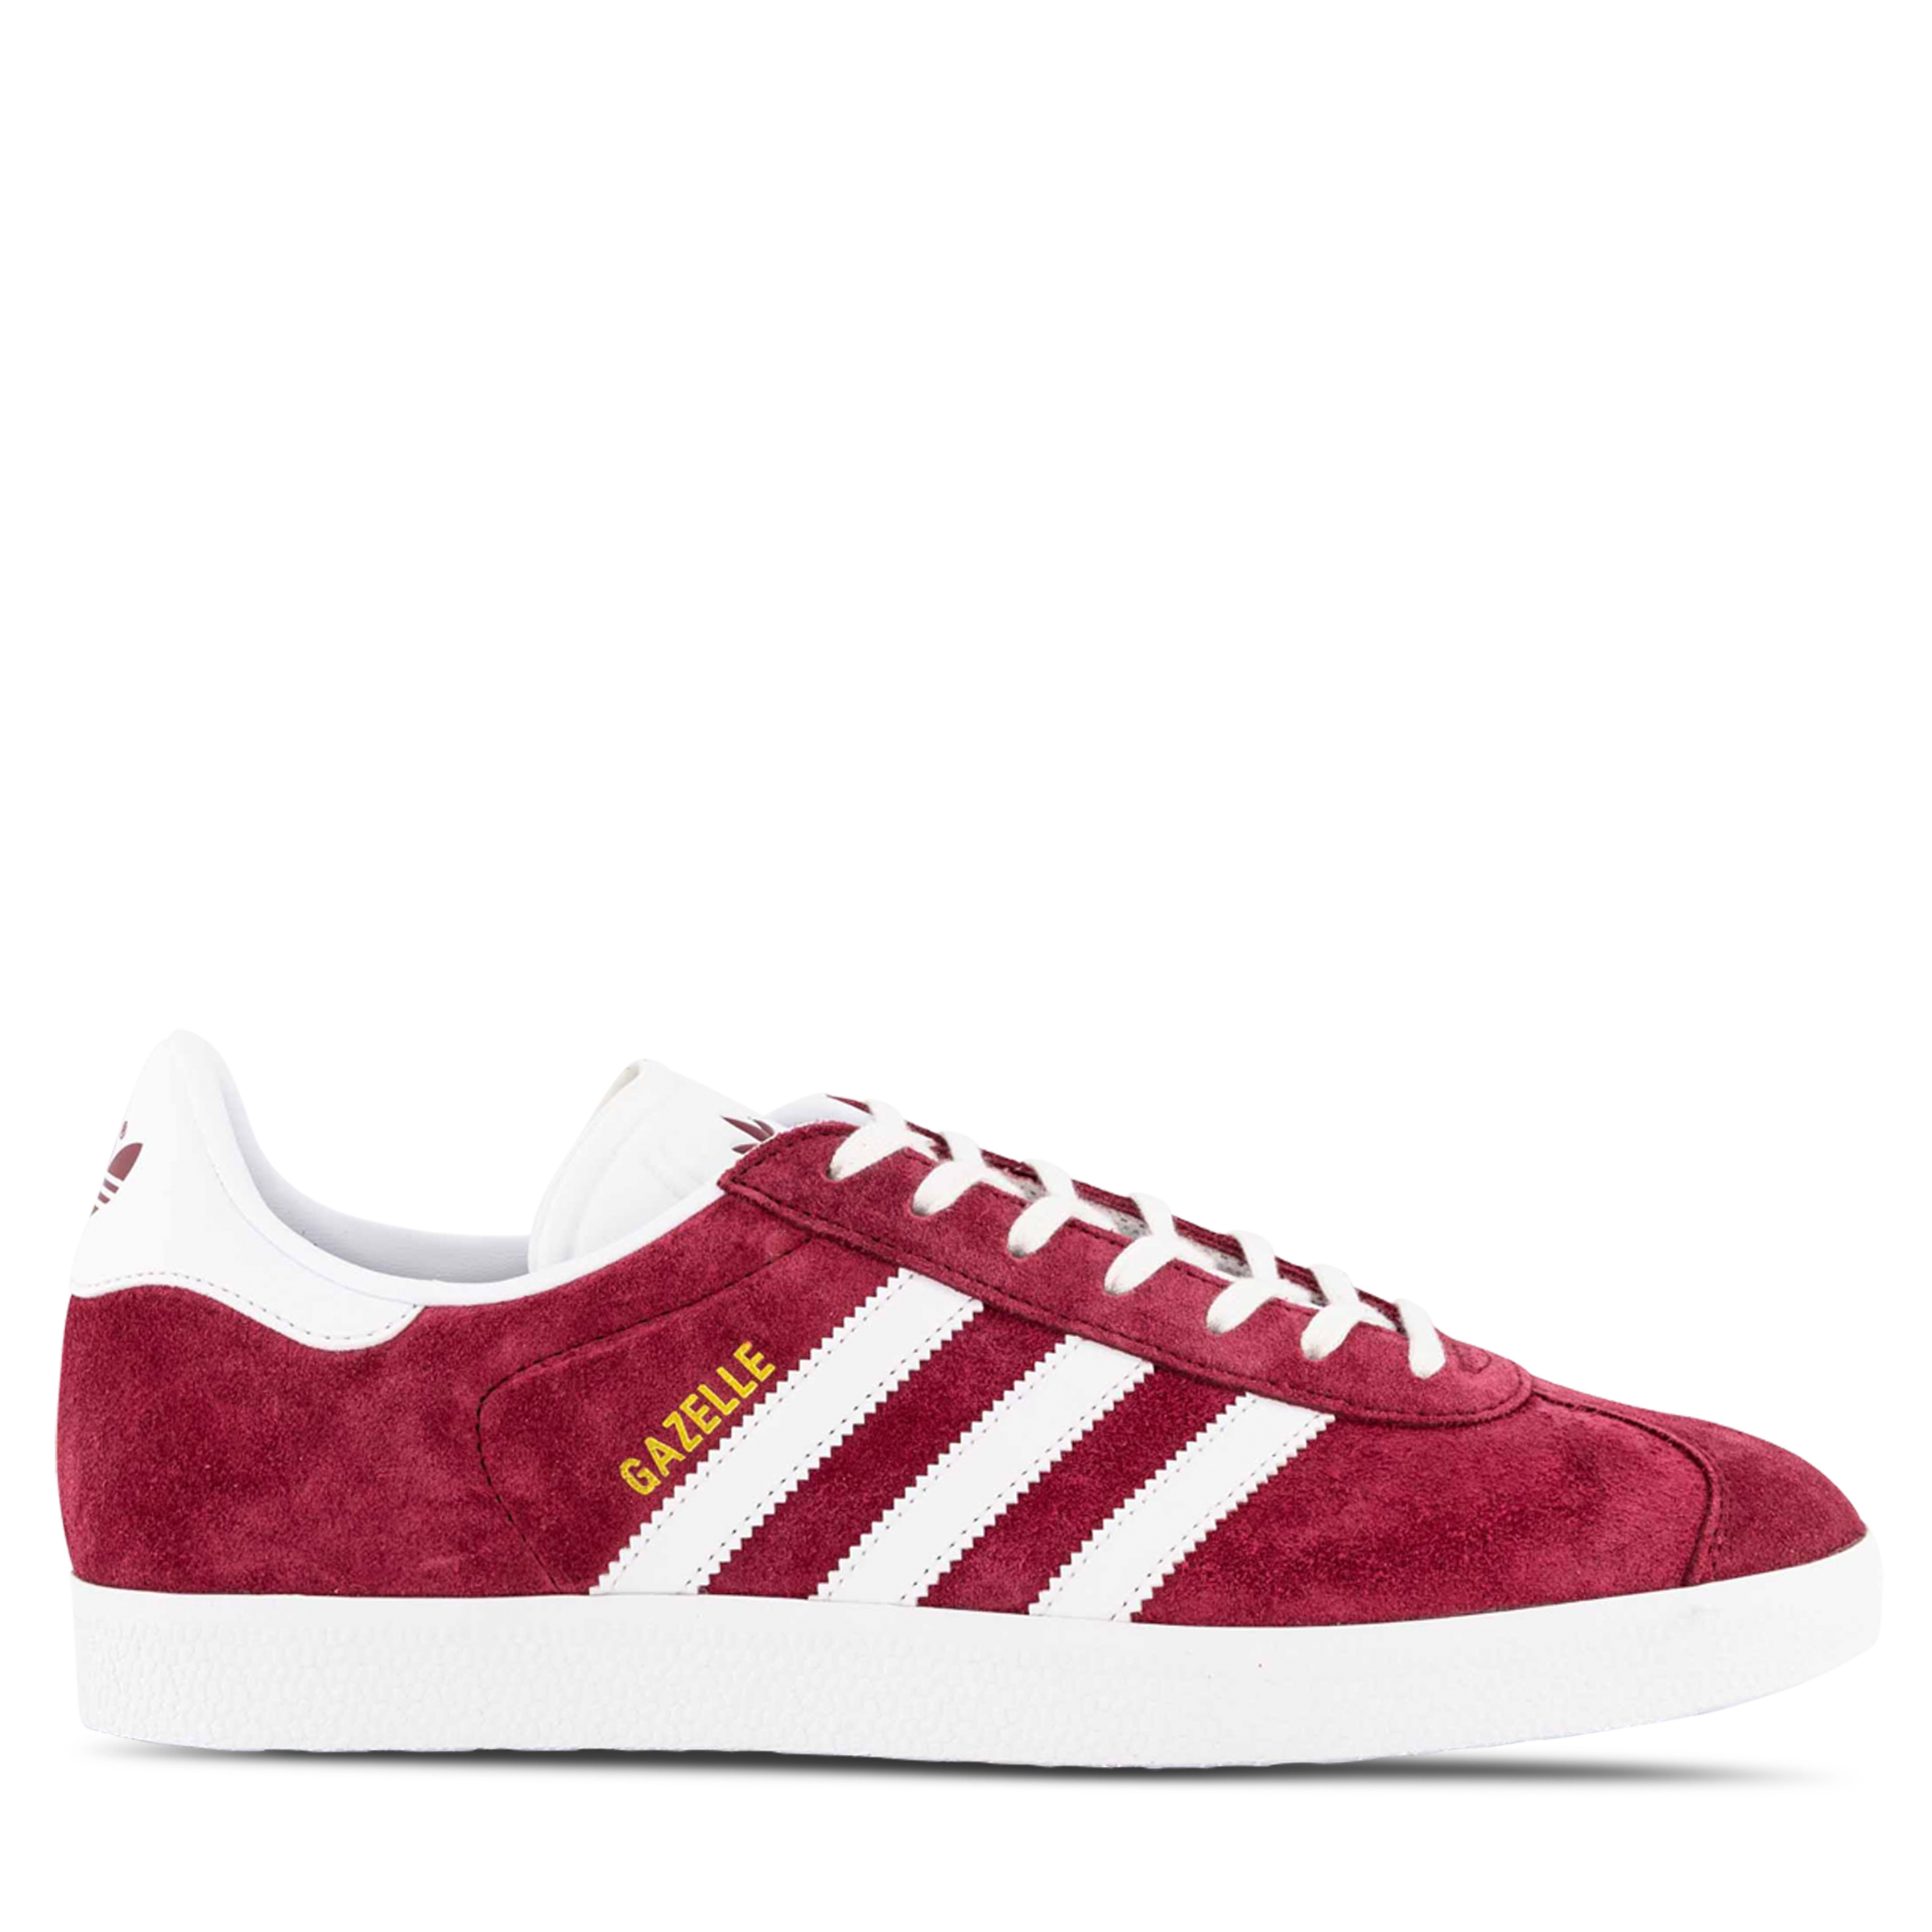 Adidas Originals Gazelle Trainers In Pink PINK | stickhealthcare.co.uk